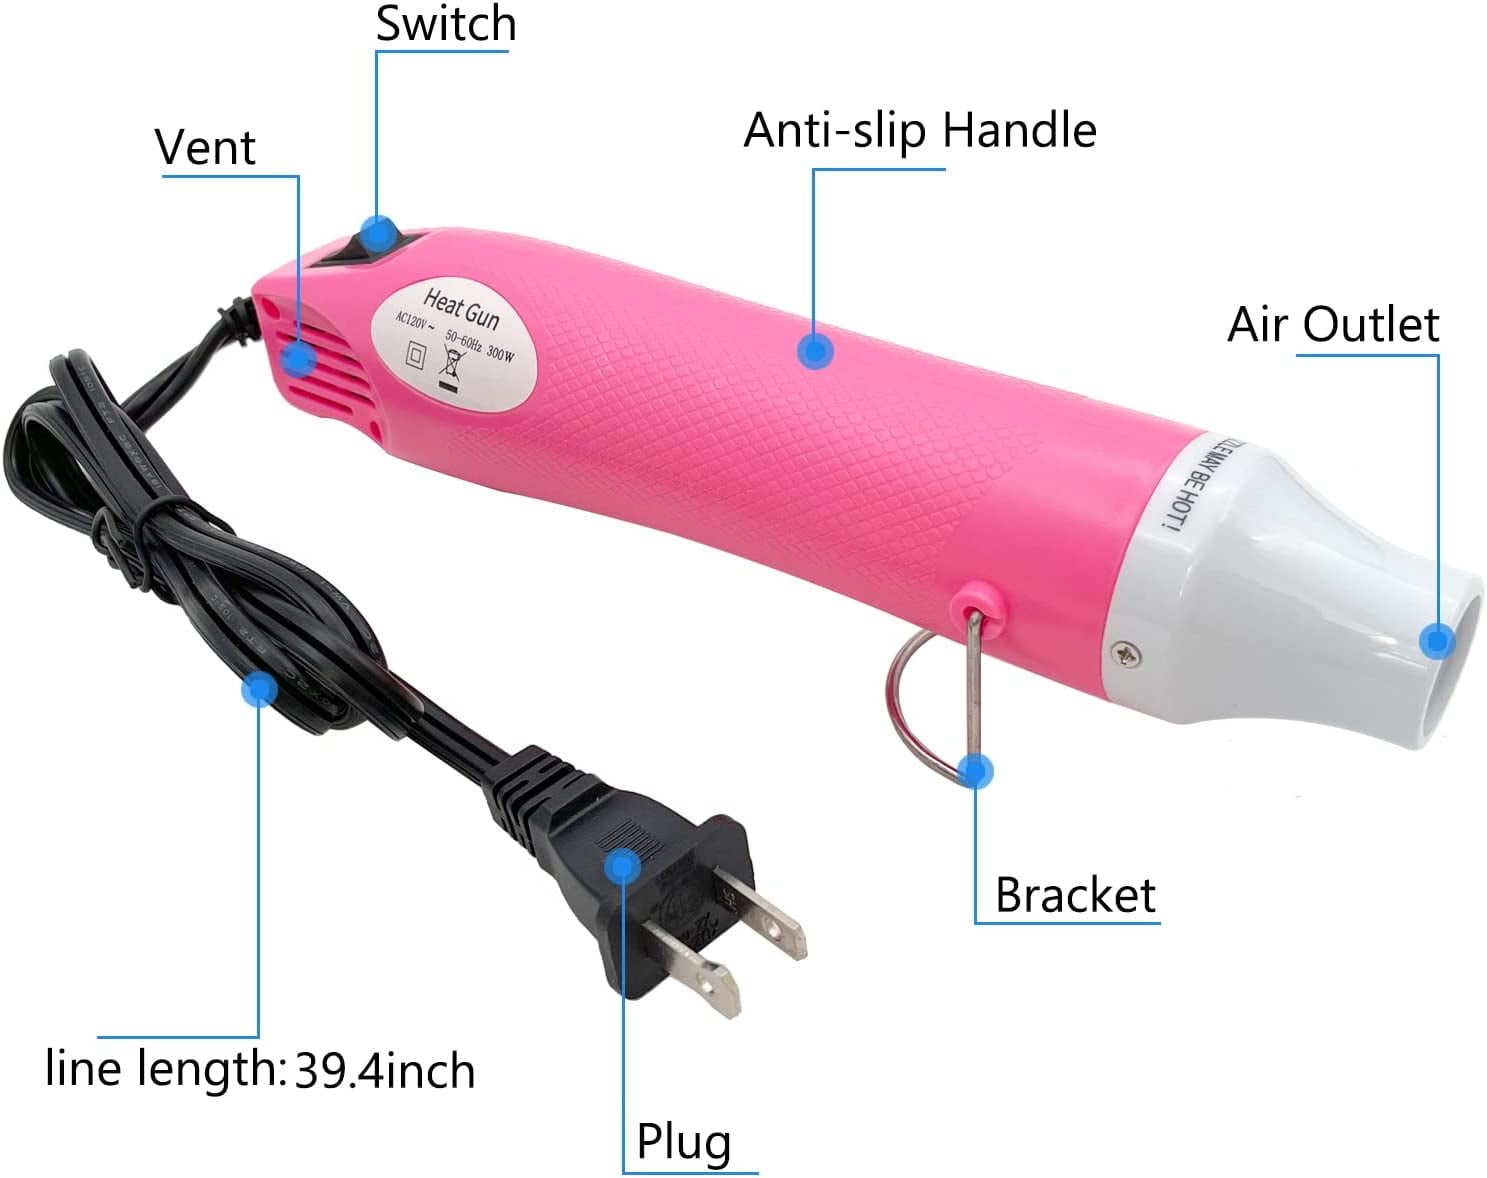  Heat Gun for Crafts, Mini Dual Temp Hot Air Gun Tool for Epoxy  Resin, Shrink Wrapping, Vinyl Wrap, Embossing, Electronics, Candle Making,  Sublimation, Phone Repair & DIY (Pink)